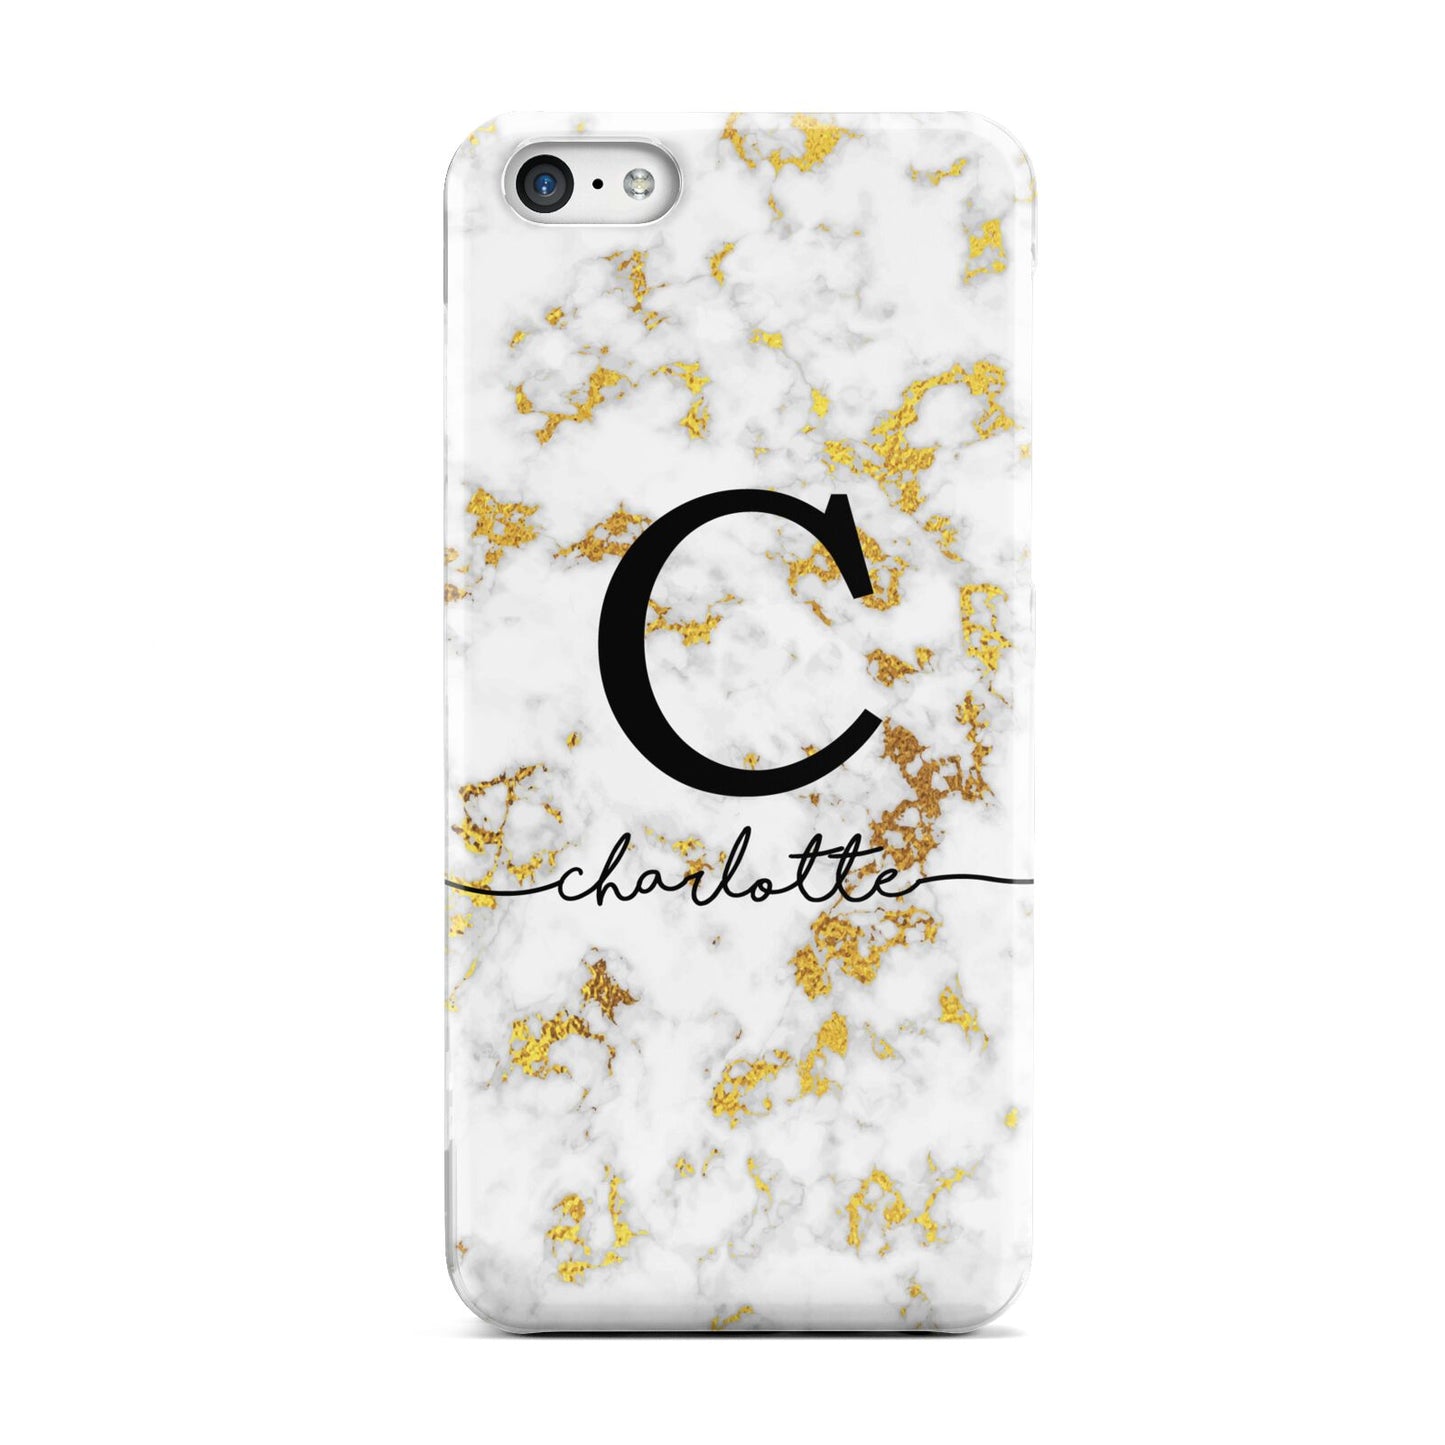 Initialled White Gold Marble with Name Apple iPhone 5c Case